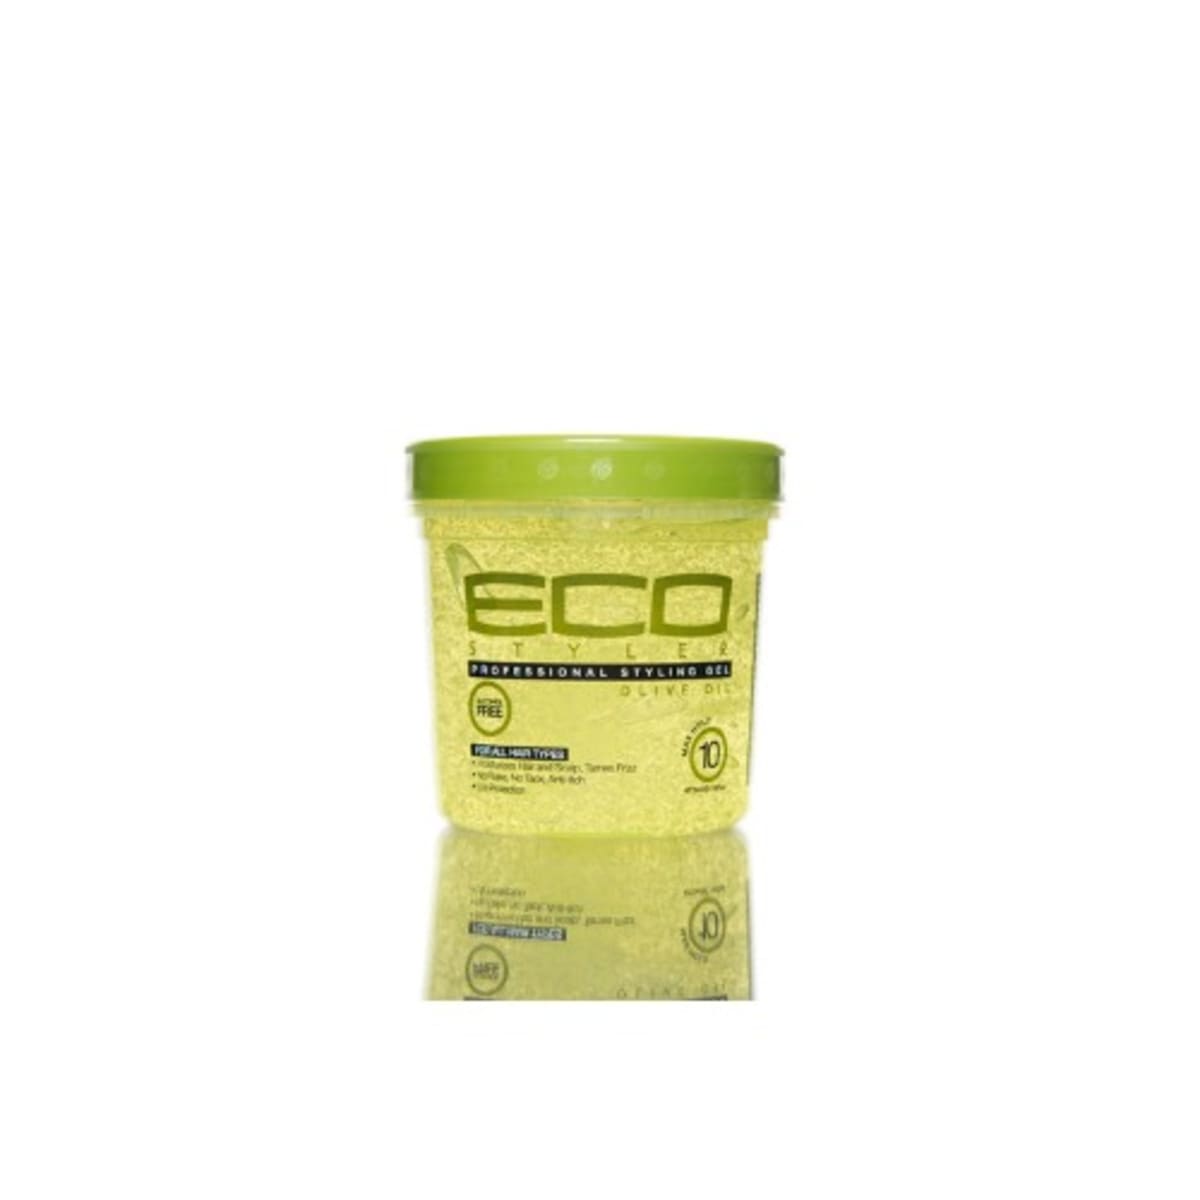 Save on Eco Styler Professional Olive Oil Styling Gel Maximum Hold Order  Online Delivery